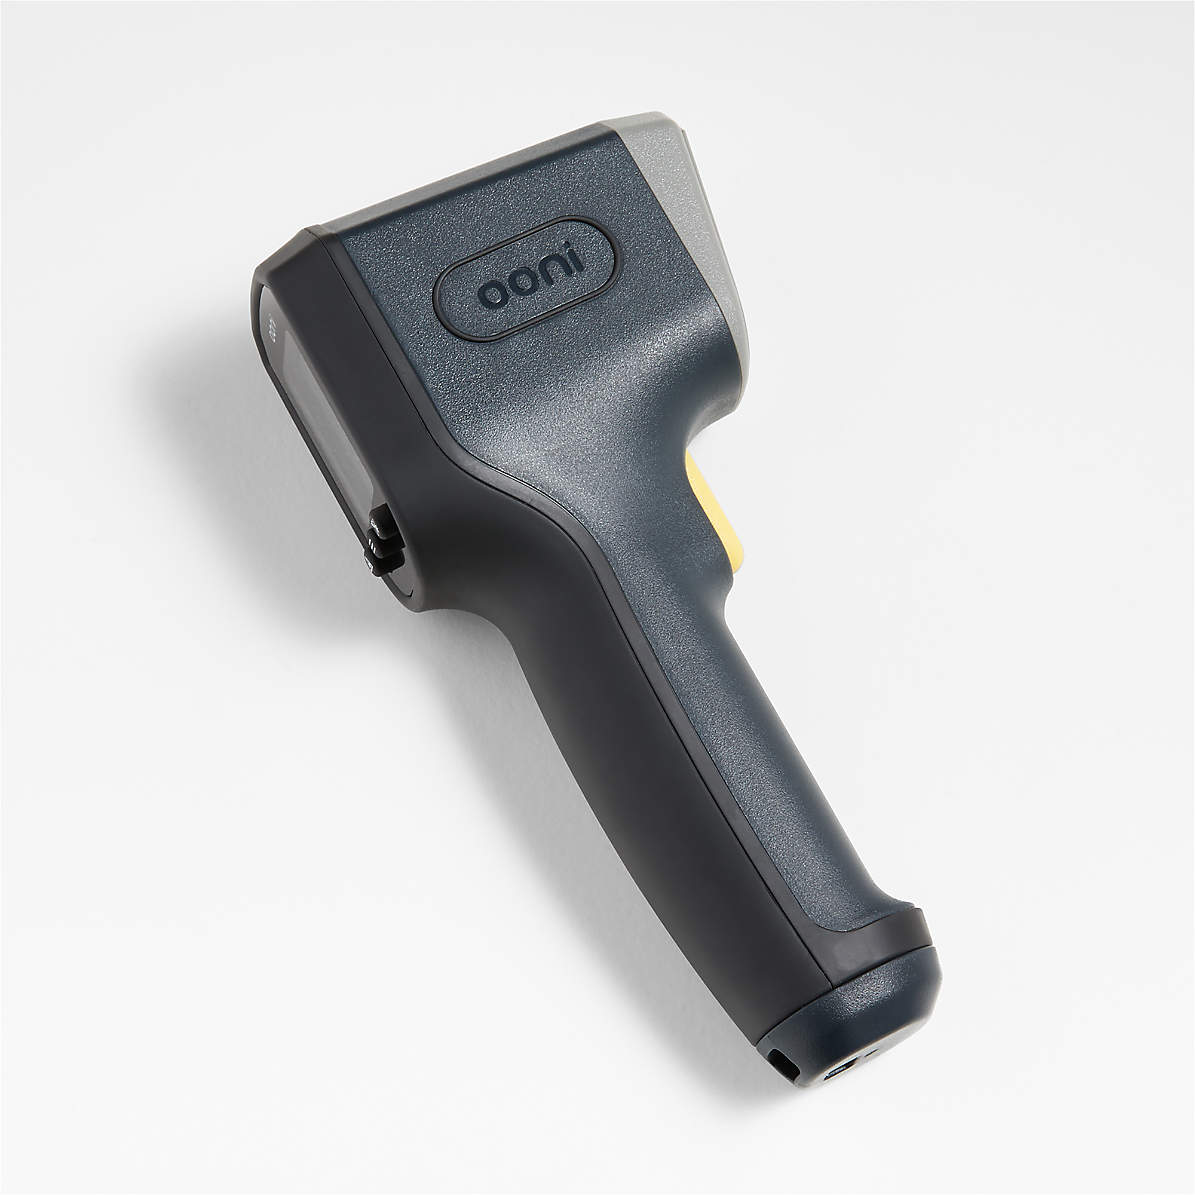 Ooni Infrared Thermometer Review